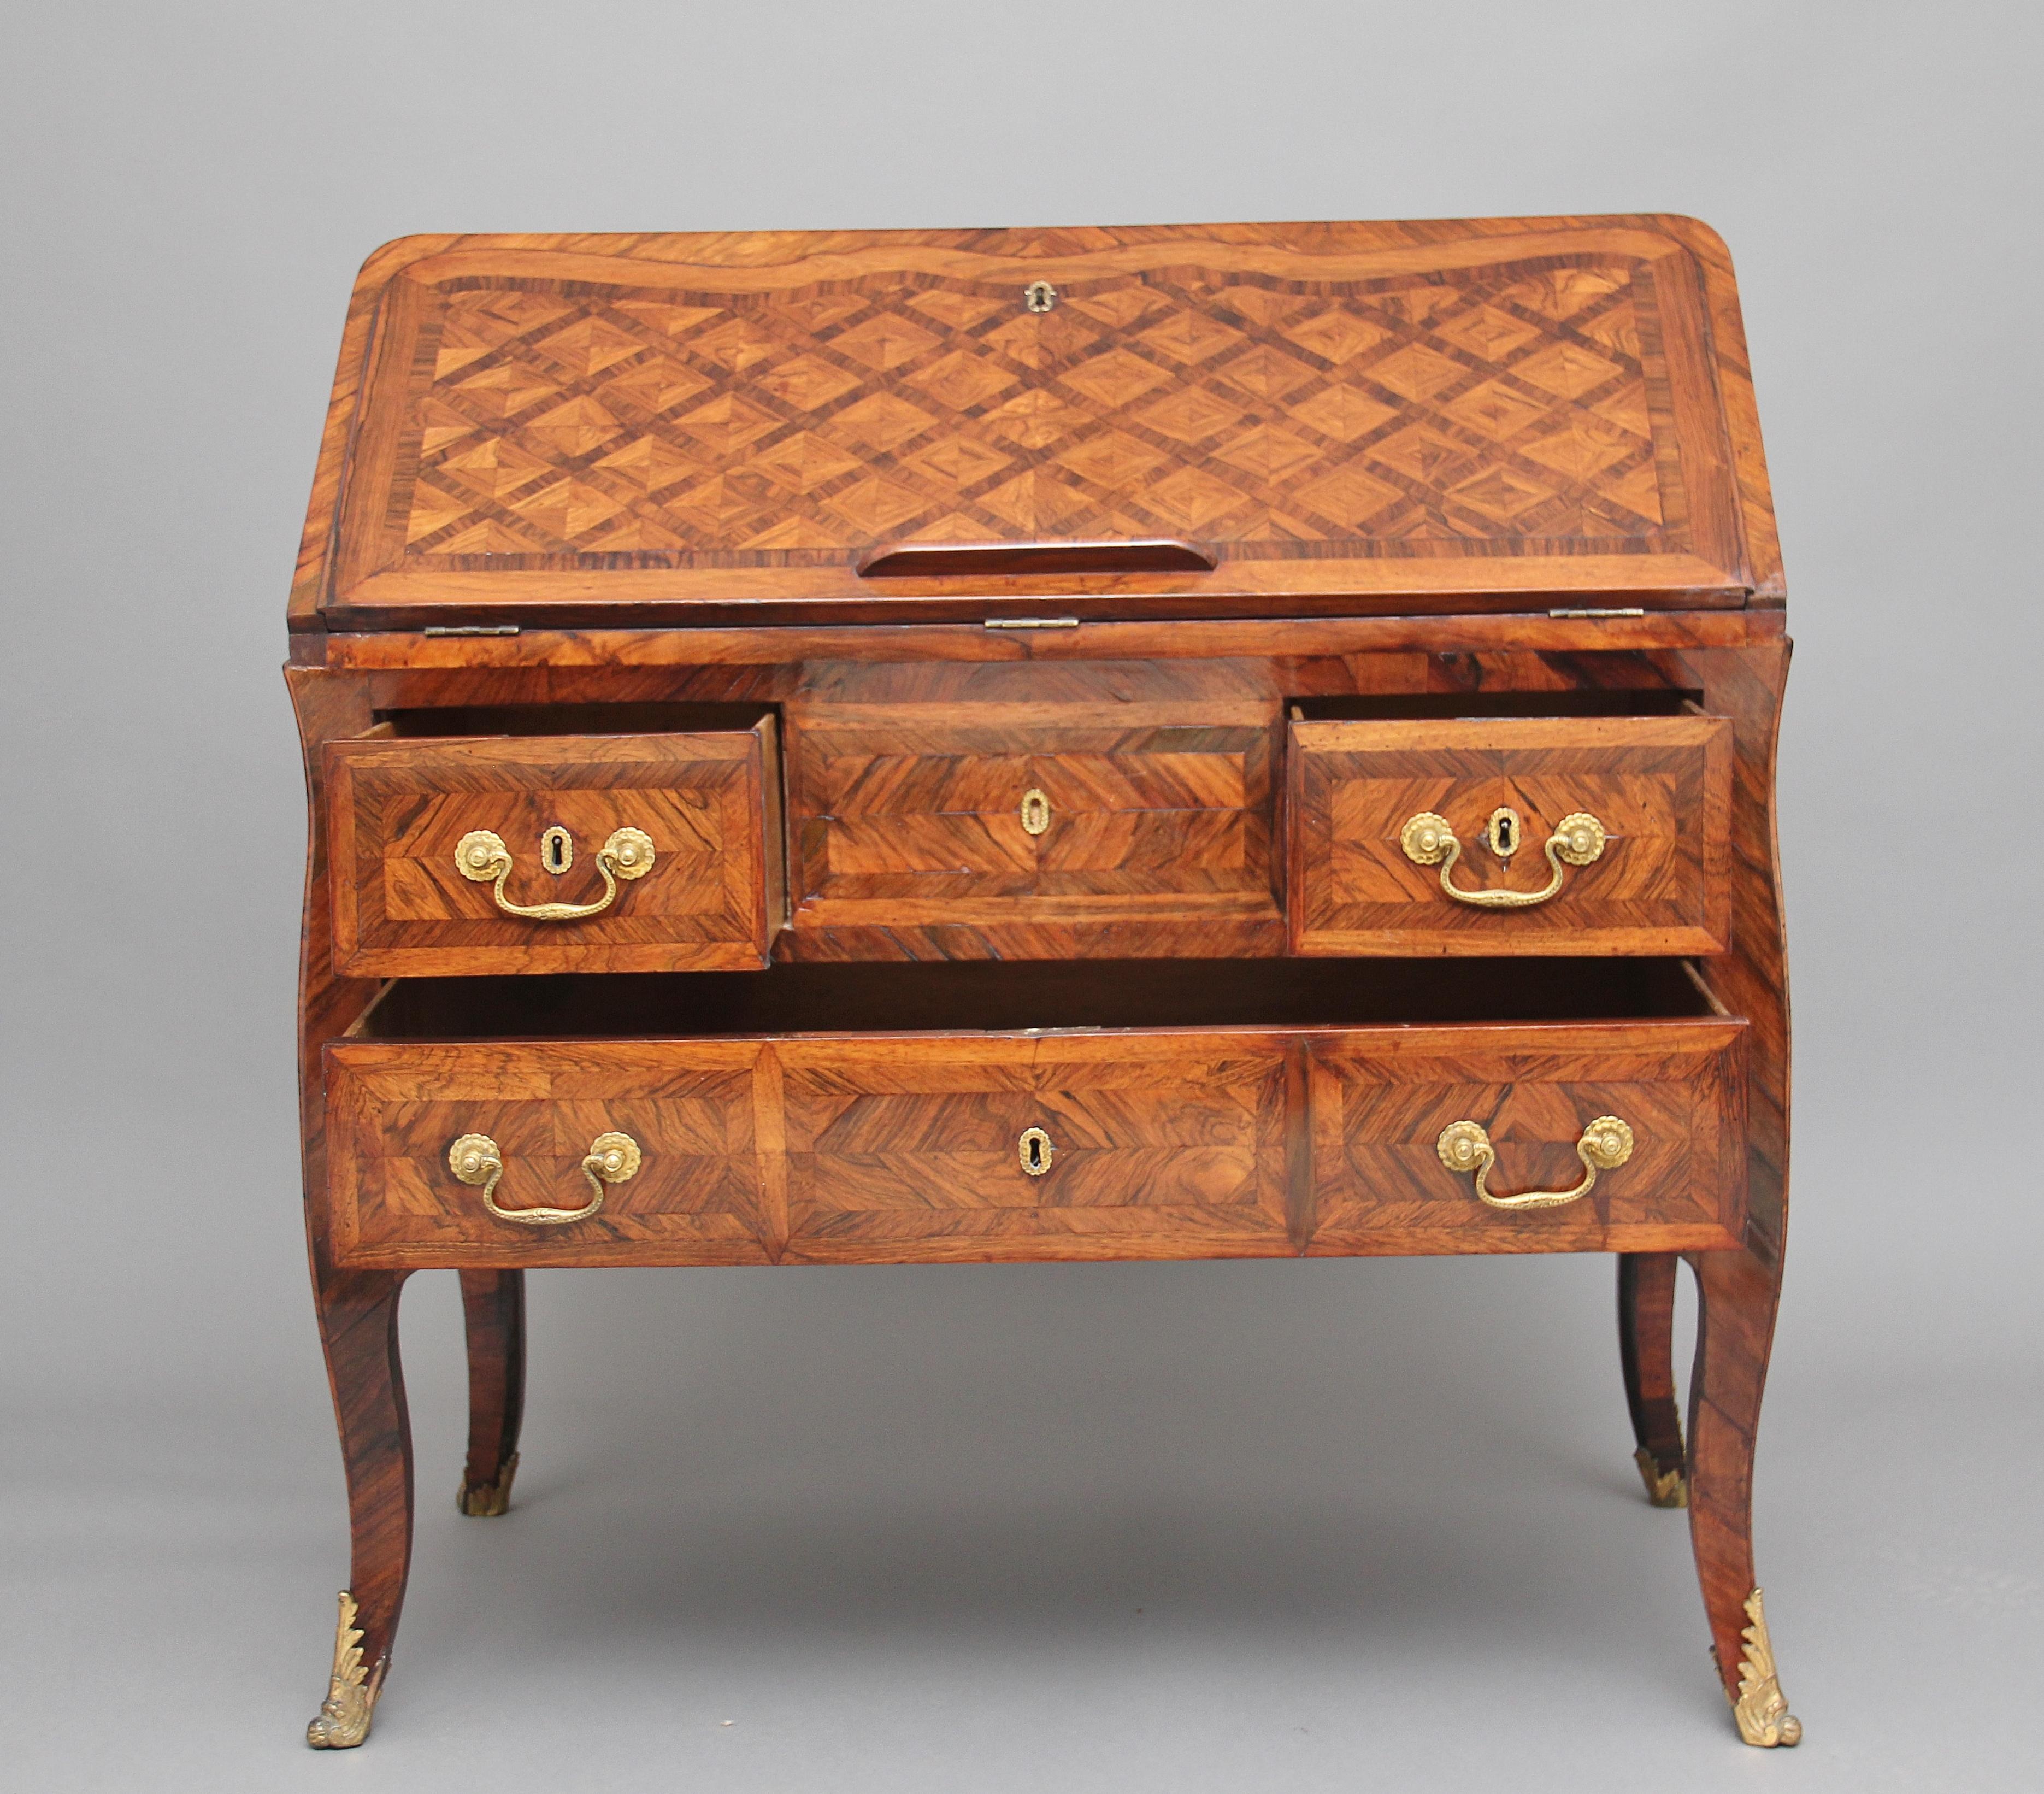 A superb quality 18th century French Kingwood desk, the shaped fall having parquetry design, opening to reveal a green leather writing surface decorated with blind and gold tooling, having a lovely fitted interior with various drawers and